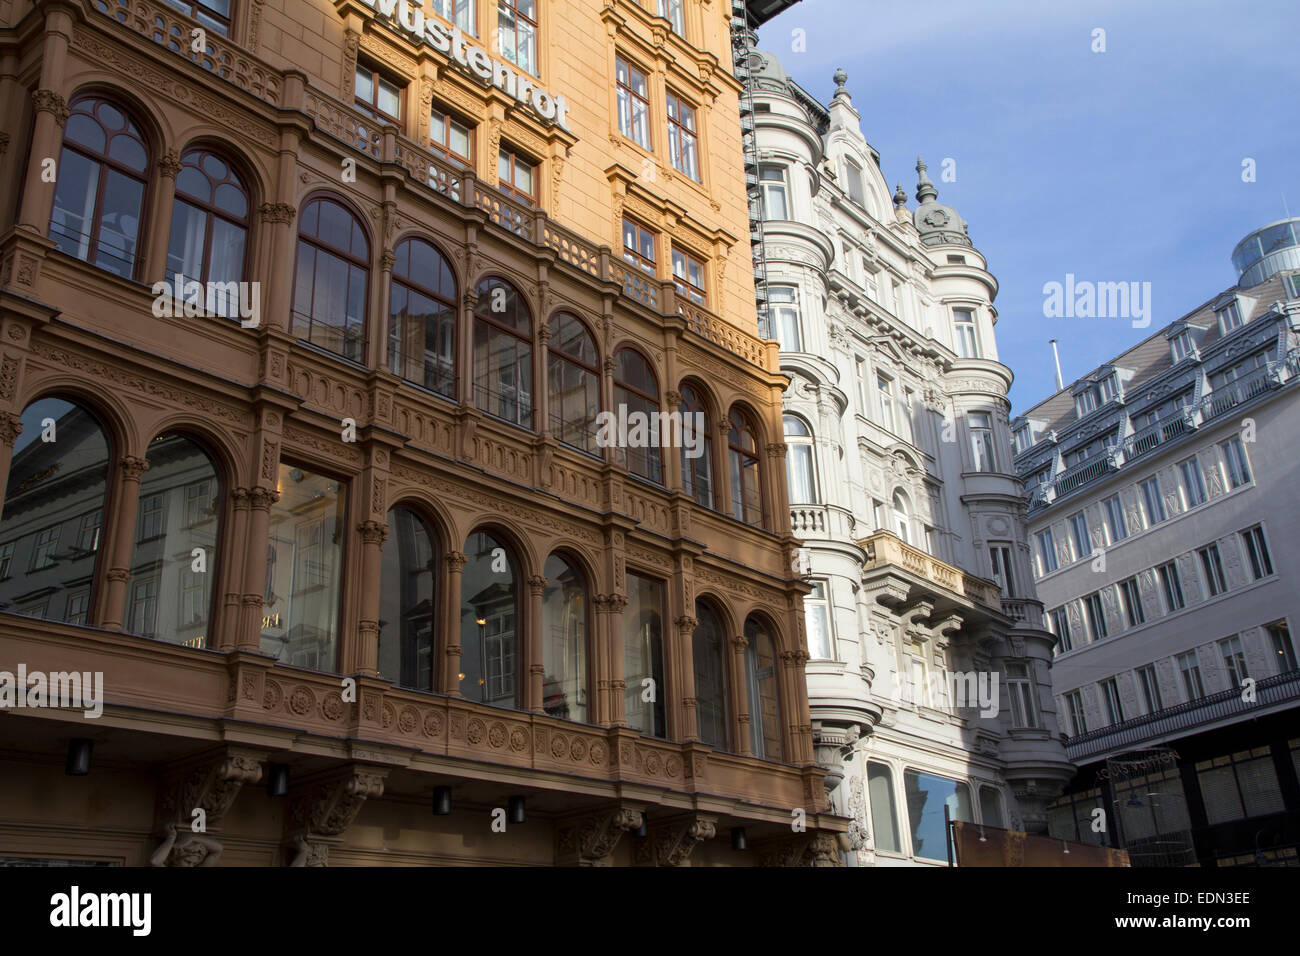 Architectural styles old and new juxtapose in the city center of Vienna, Austria. Stock Photo